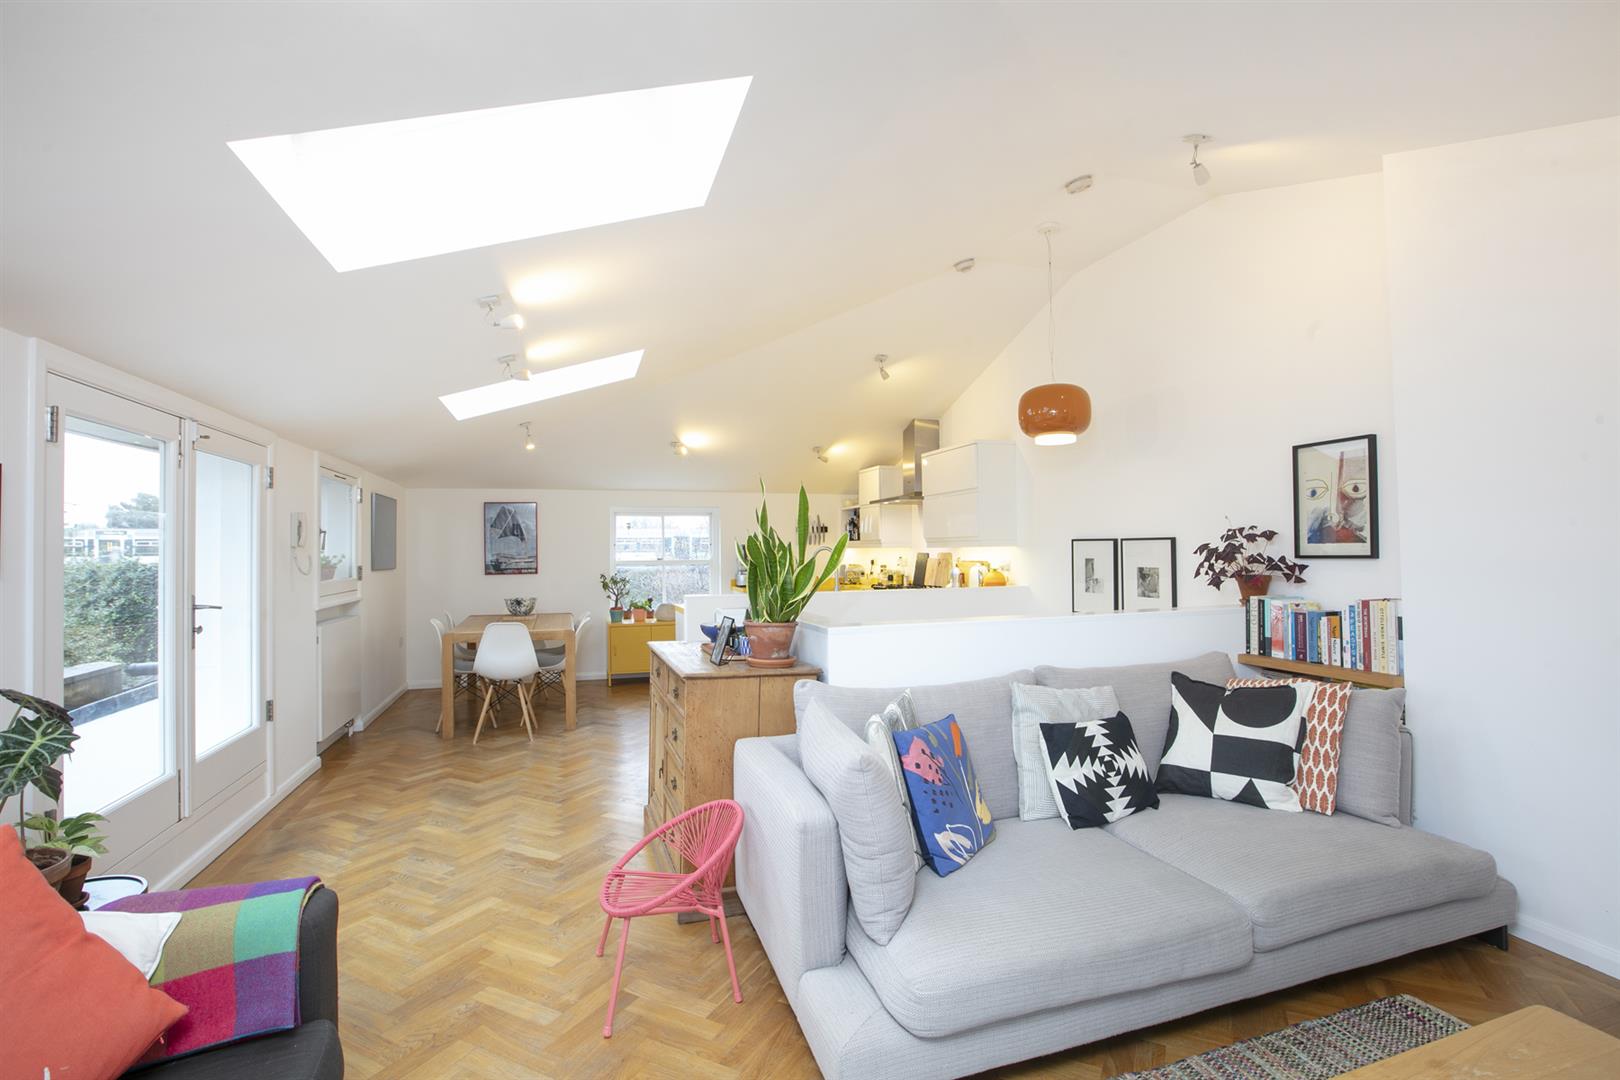 Flat - Conversion Under Offer in Holly Grove, Peckham, SE15 893 view5